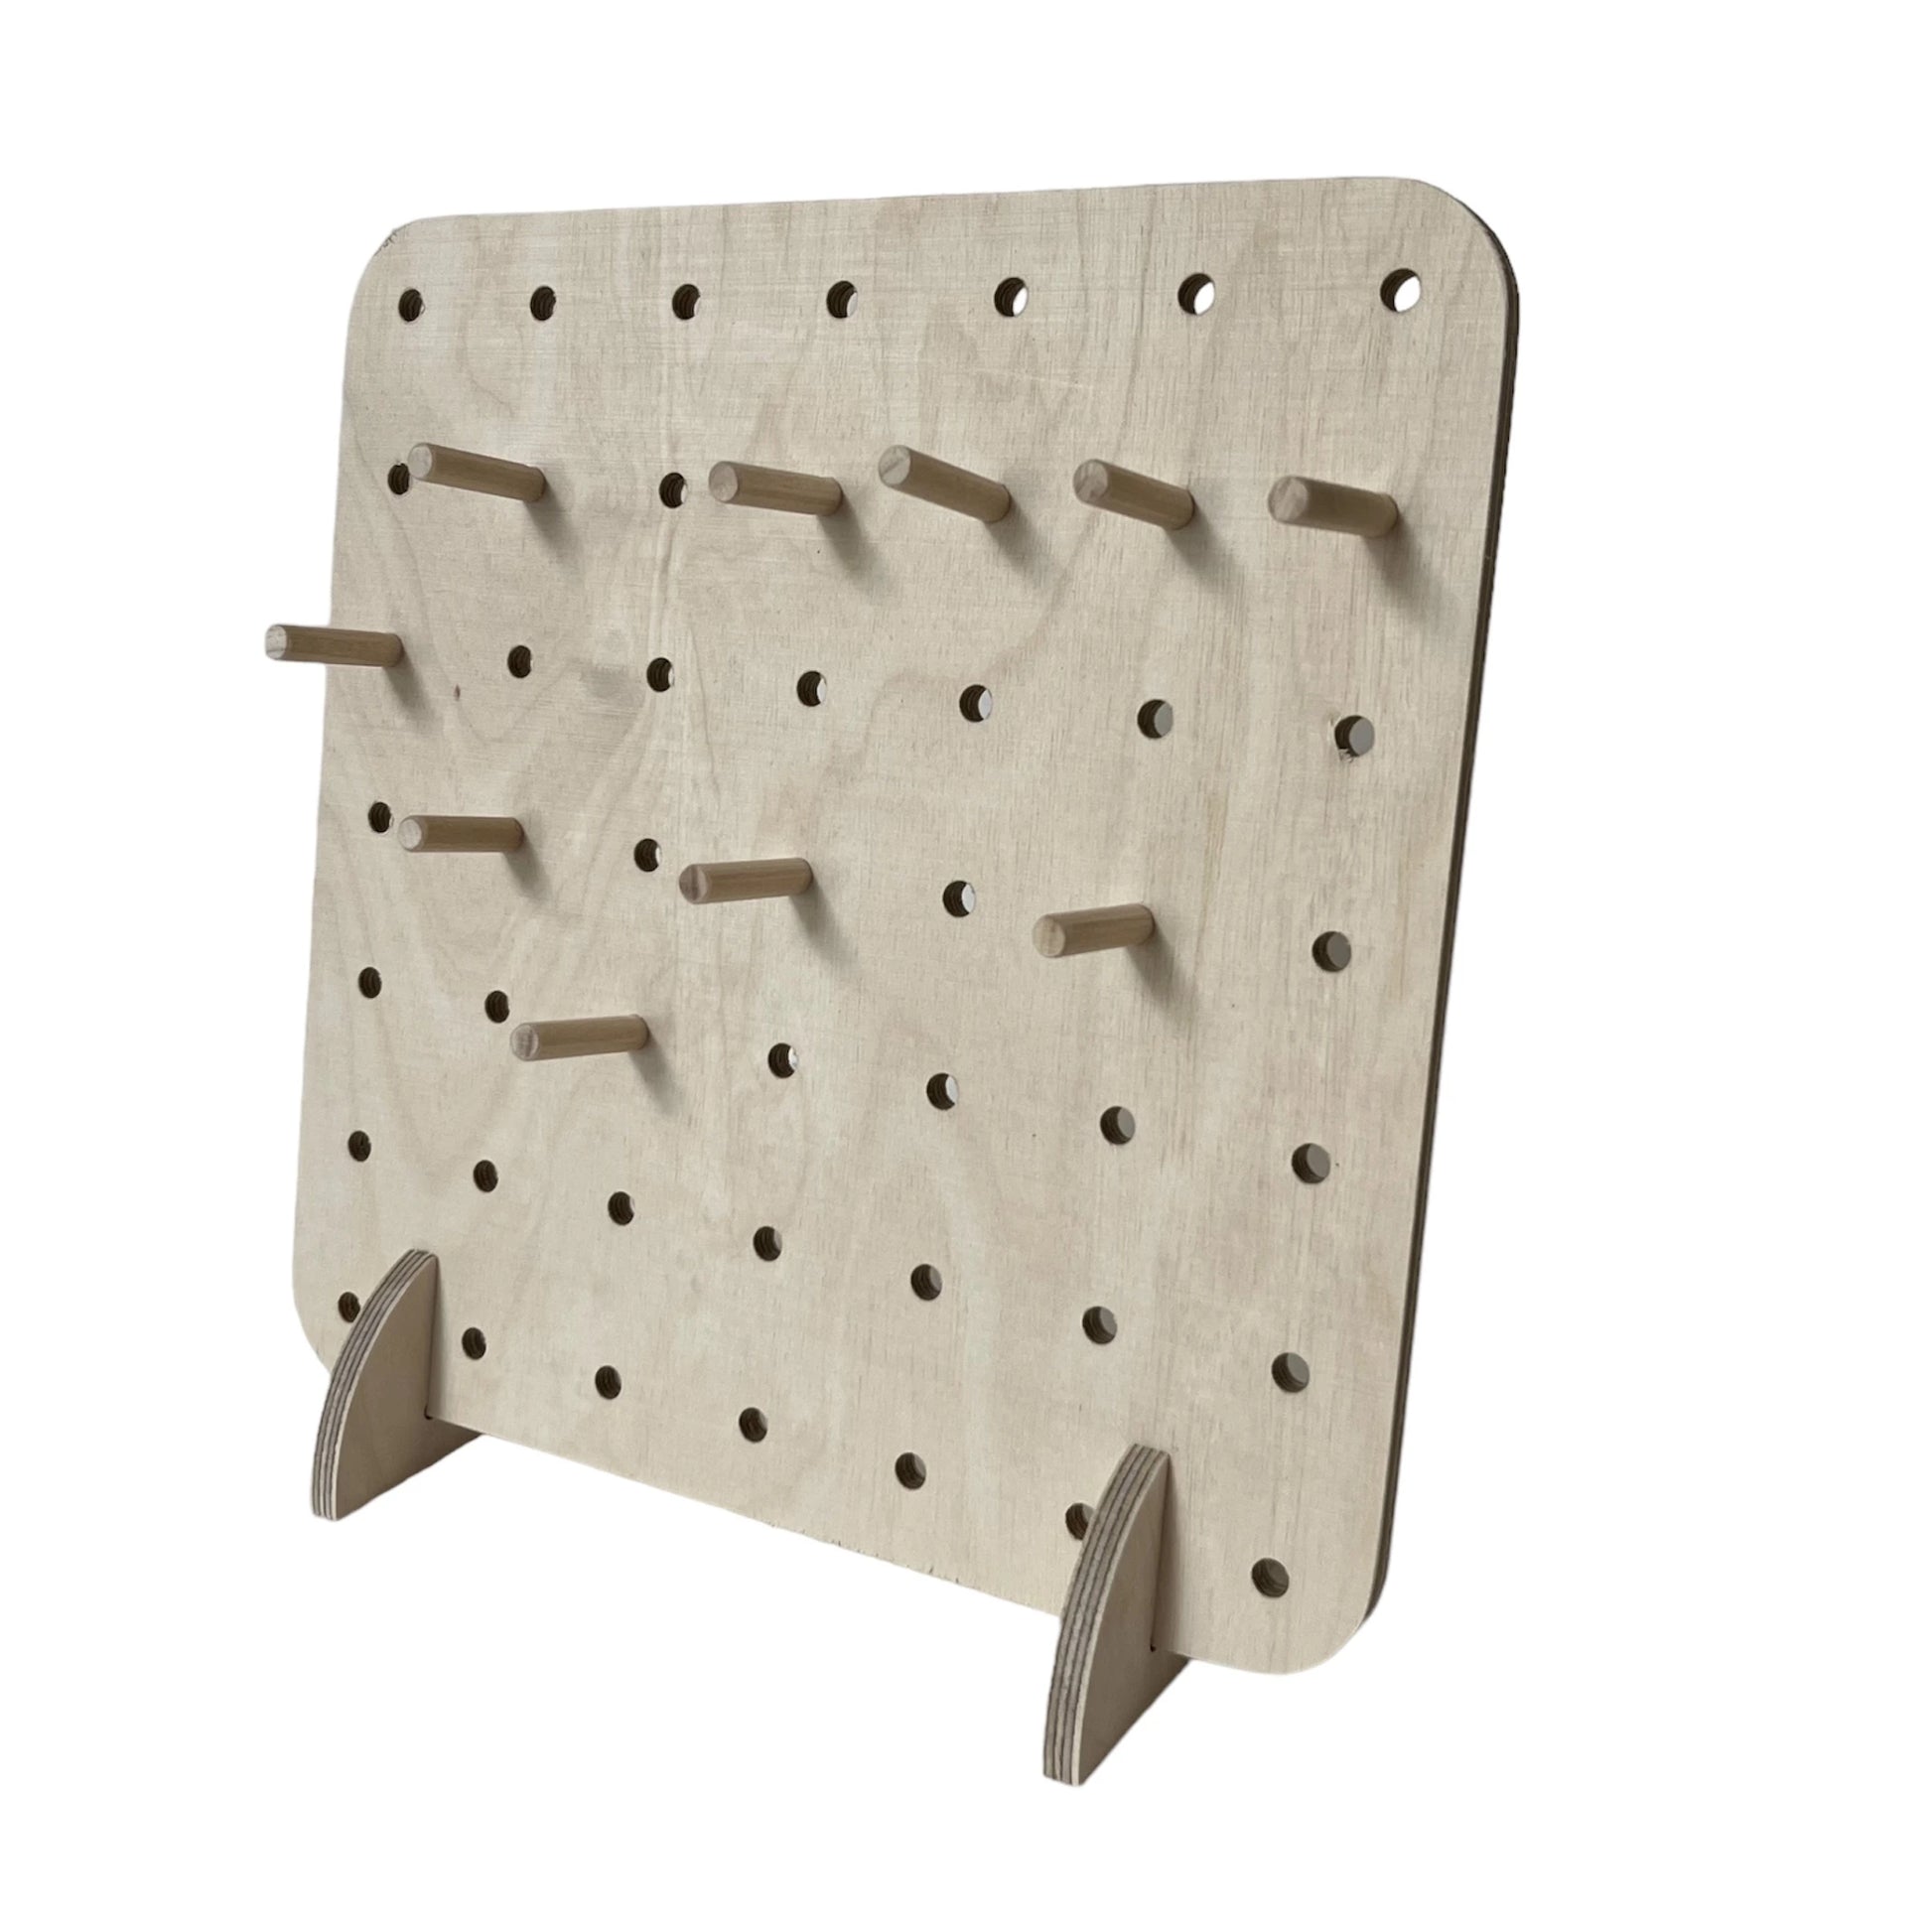 Pale wooden square pegboard with small 6mm drilled holes and some pegs facing to left